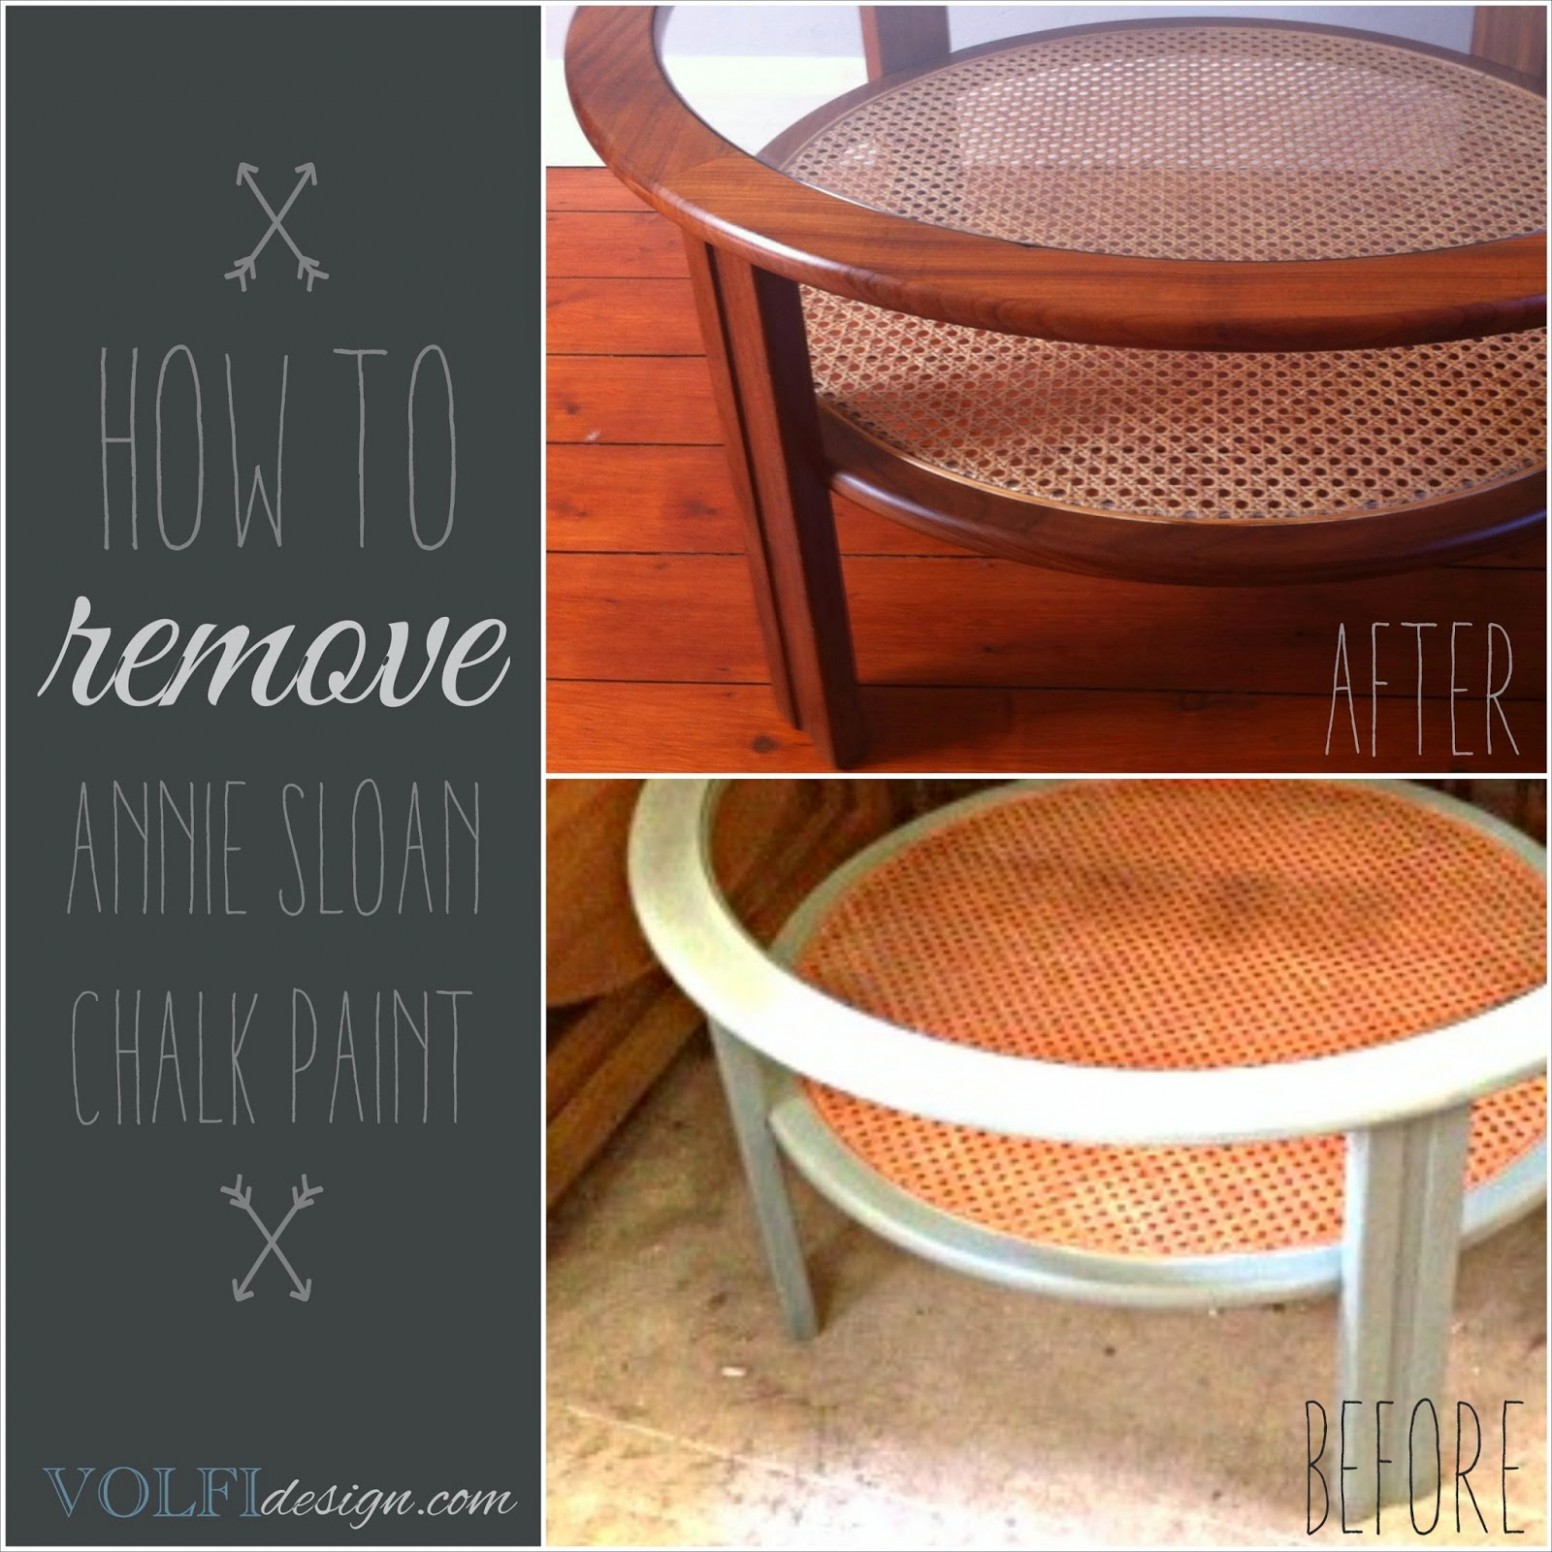 Volfidesign: How To Remove Annie Sloan Chalk Paint Can You Use Oil Based Paint Over Chalk Paint